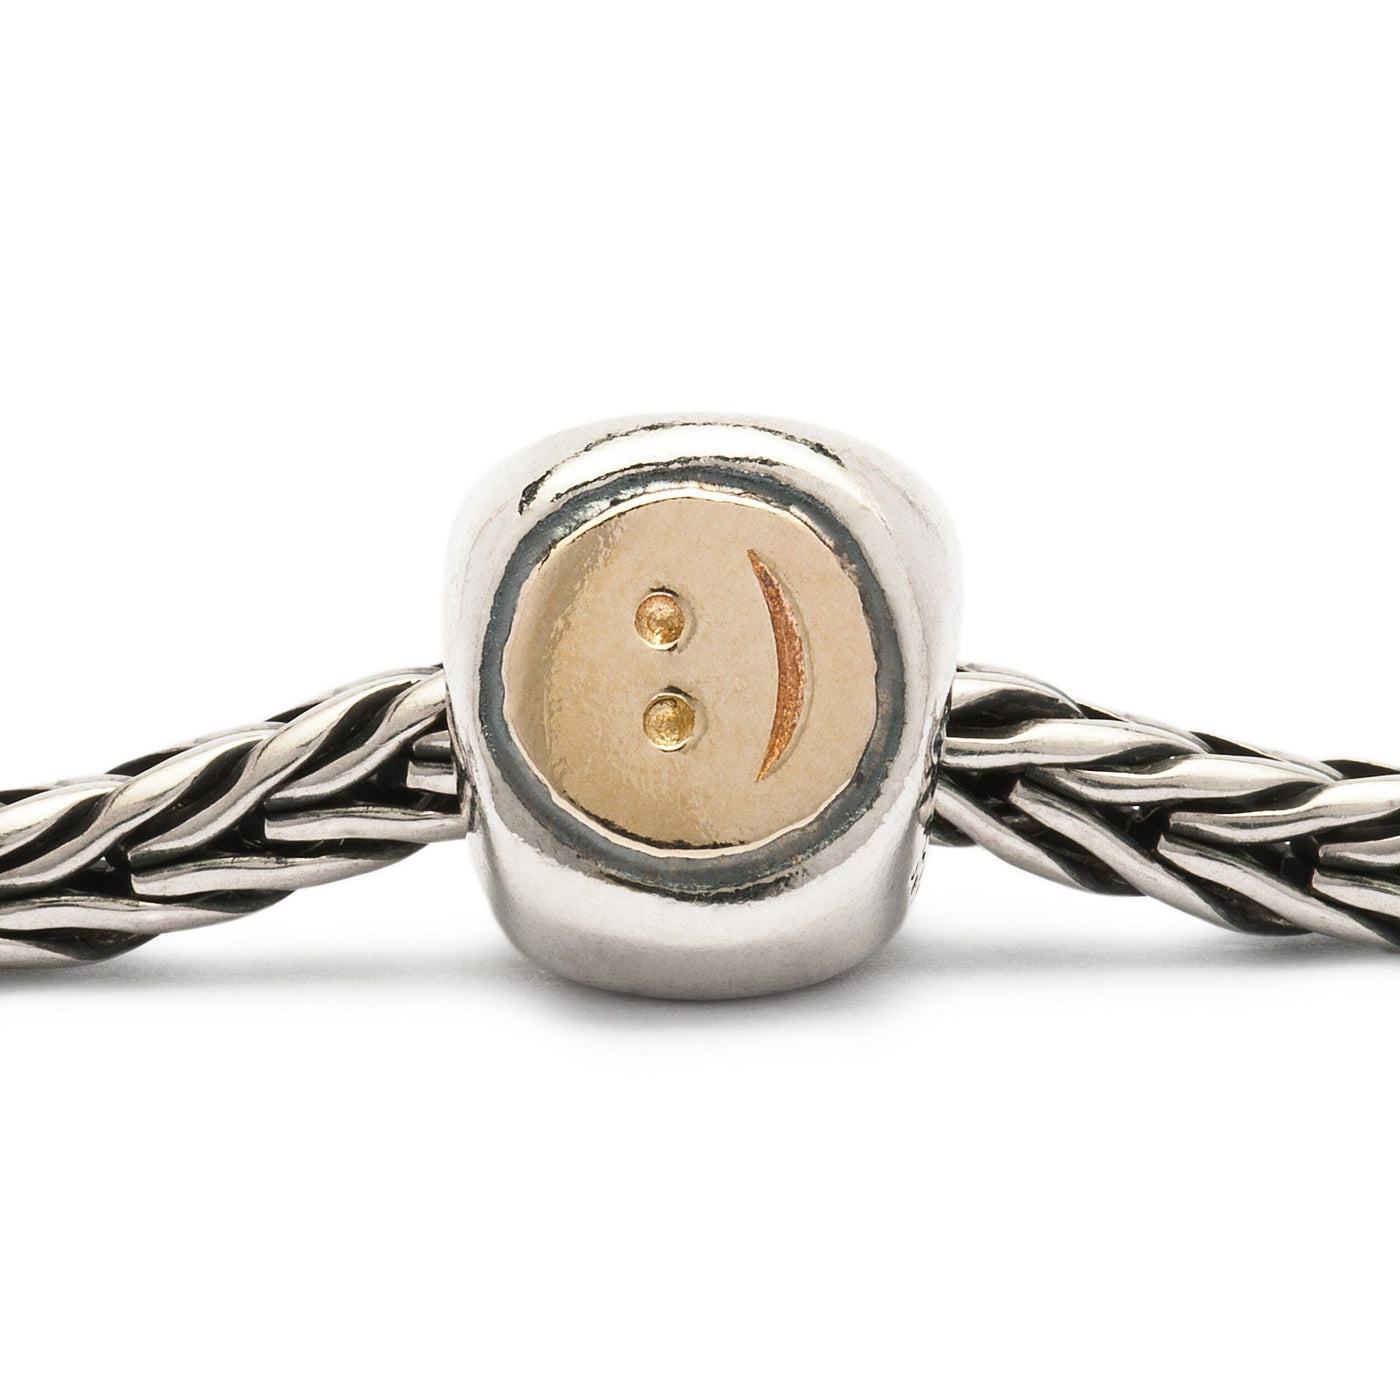 Pursuit of Happiness - Trollbeads Canada